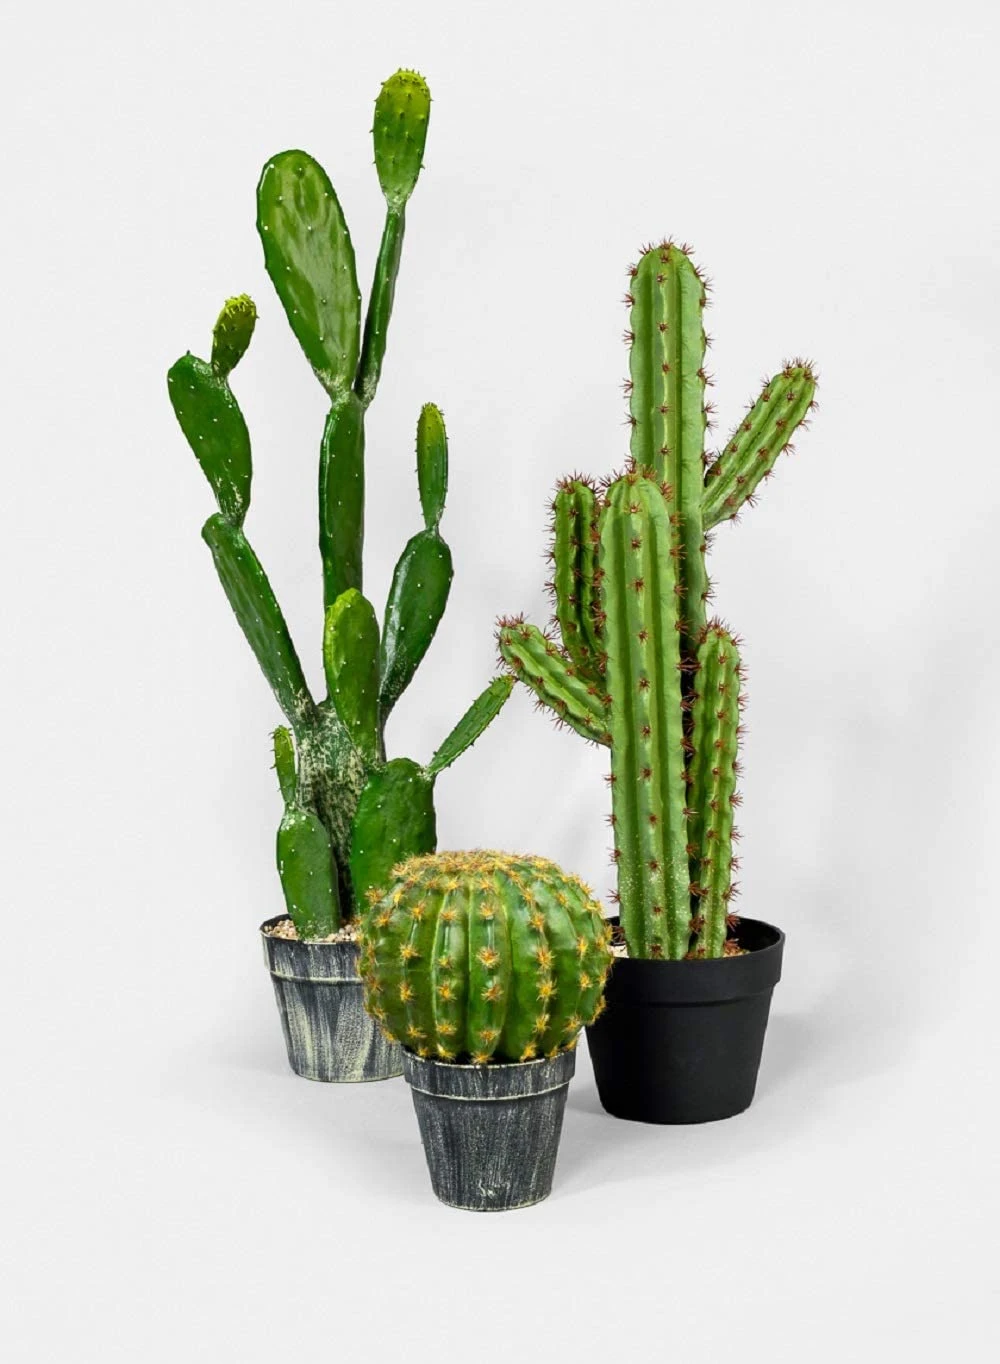 Serene Spaces Living Real Looking Artificial Tall Candelabra Cactus - Artificial Plant Faux Cactus with Realistic Cactus Limbs, Perfect for Indoor Home Decor